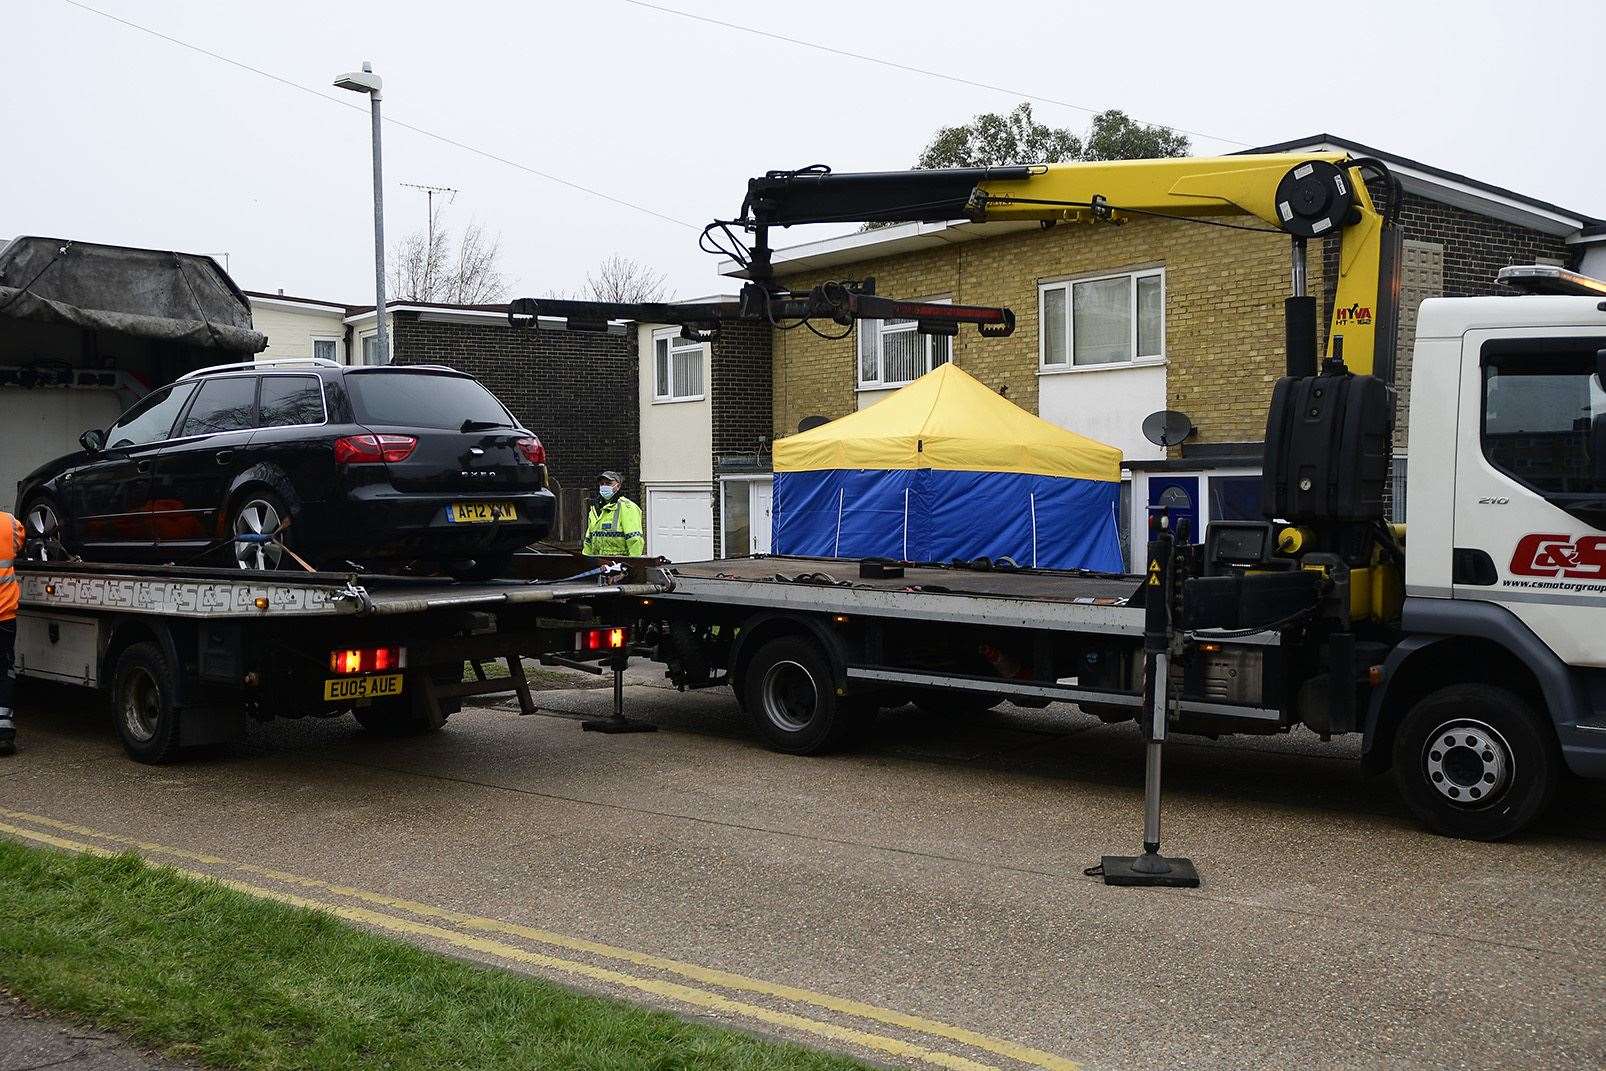 A car was removed at Freemens Way. Picture: Barry Goodwin